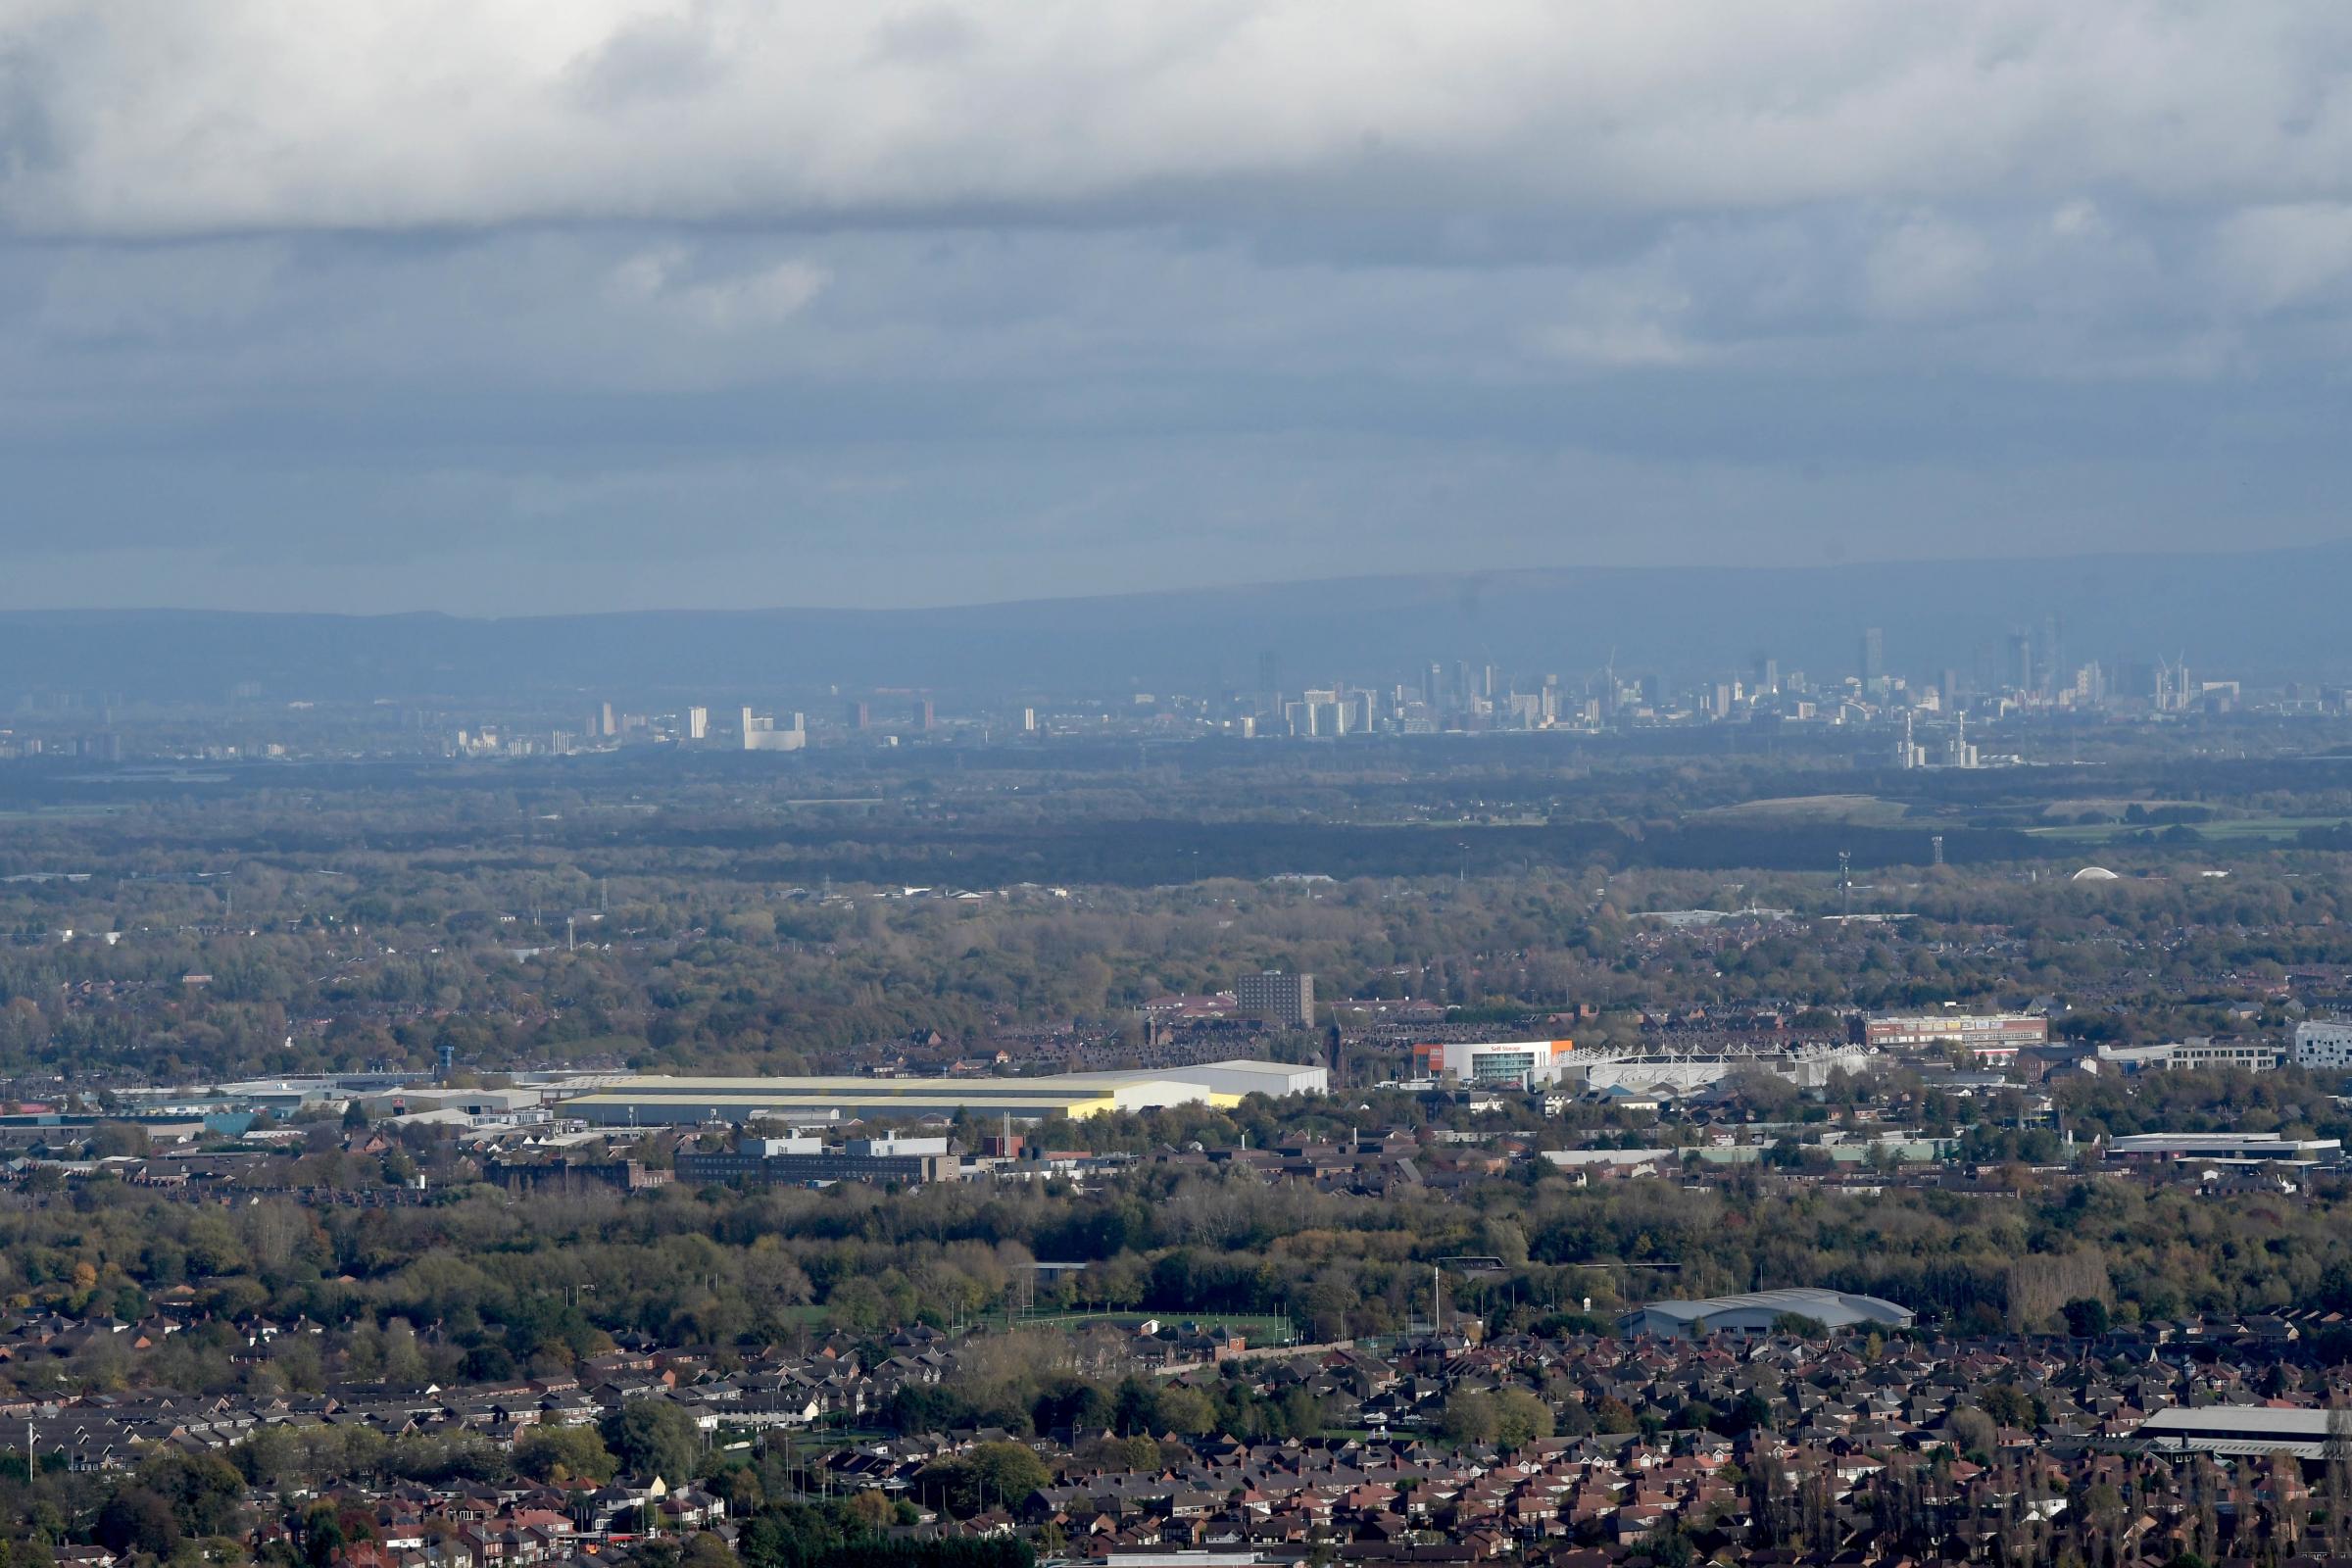 The Manchester skyline from the top of Fiddlers Ferry power station. Pictures: Dave Gillespie